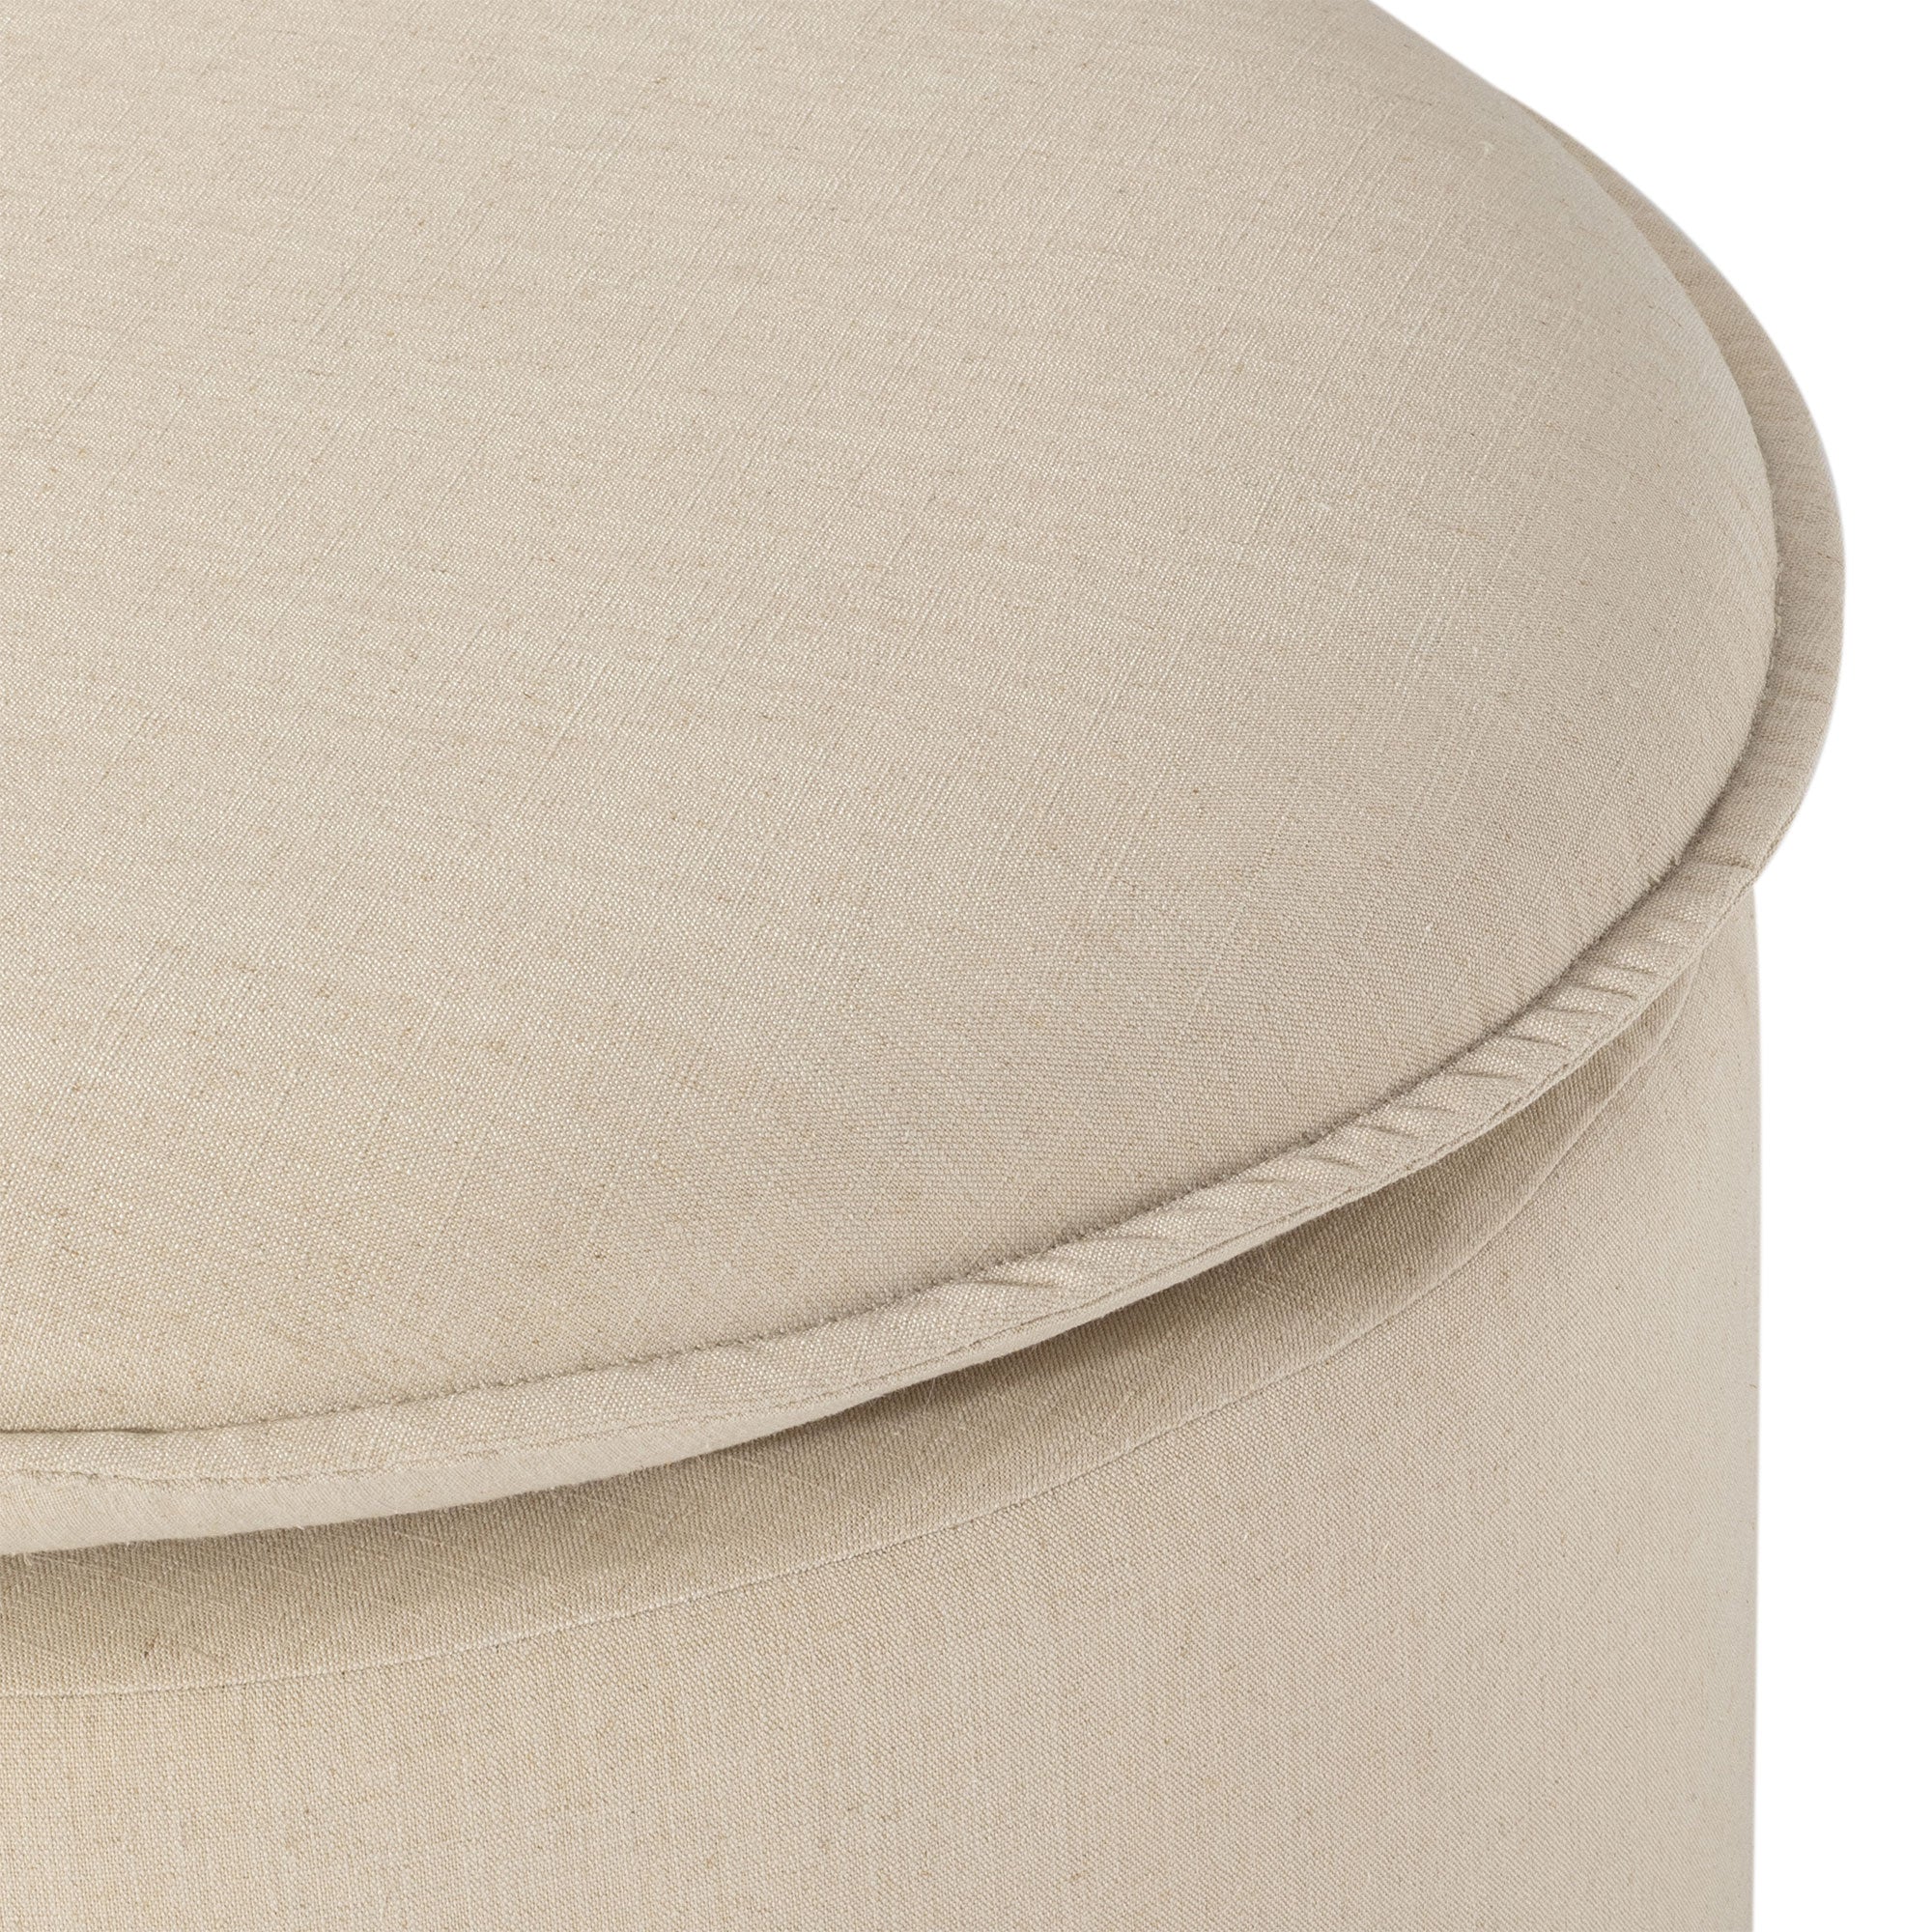 Lyra Organic Ottoman in Taupe Fabric Upholstery in Ottomans & Benches by Maven Lane